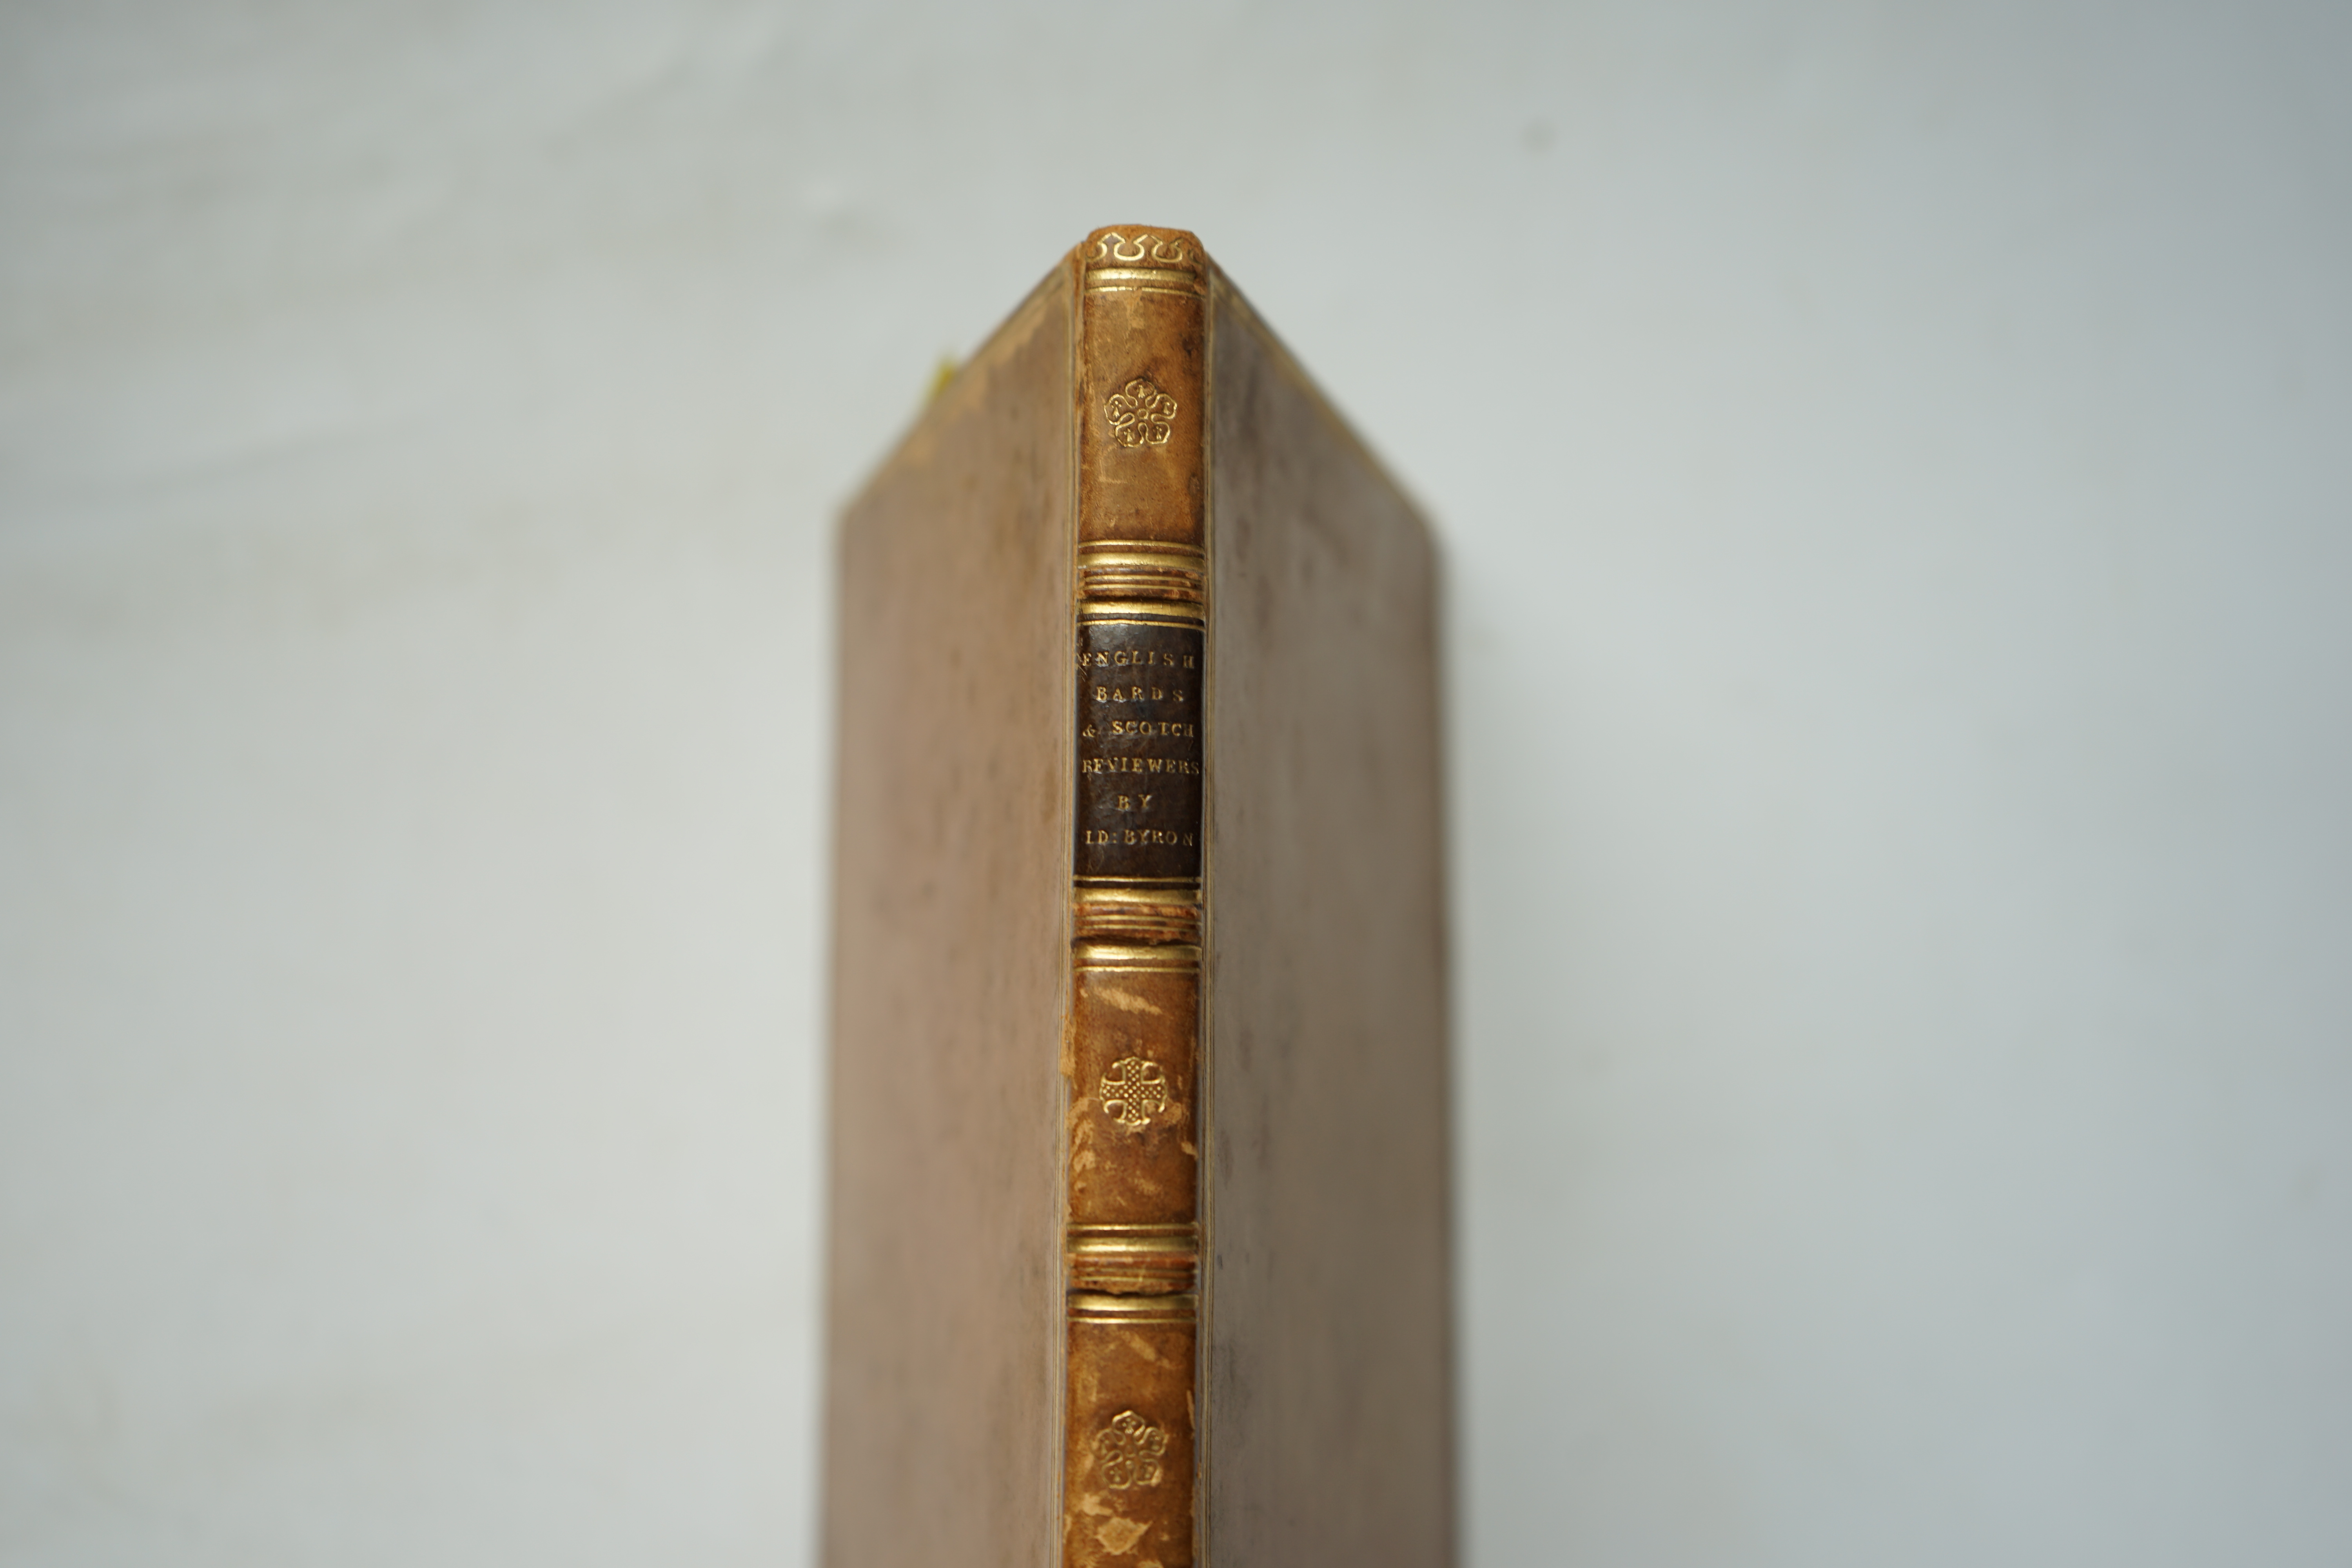 Byron, George Gordon Noel, Lord - English Bards and Scotch Reviewers . A Satire, 1st edition, with half title and preface, 12mo, calf, London, [1809].